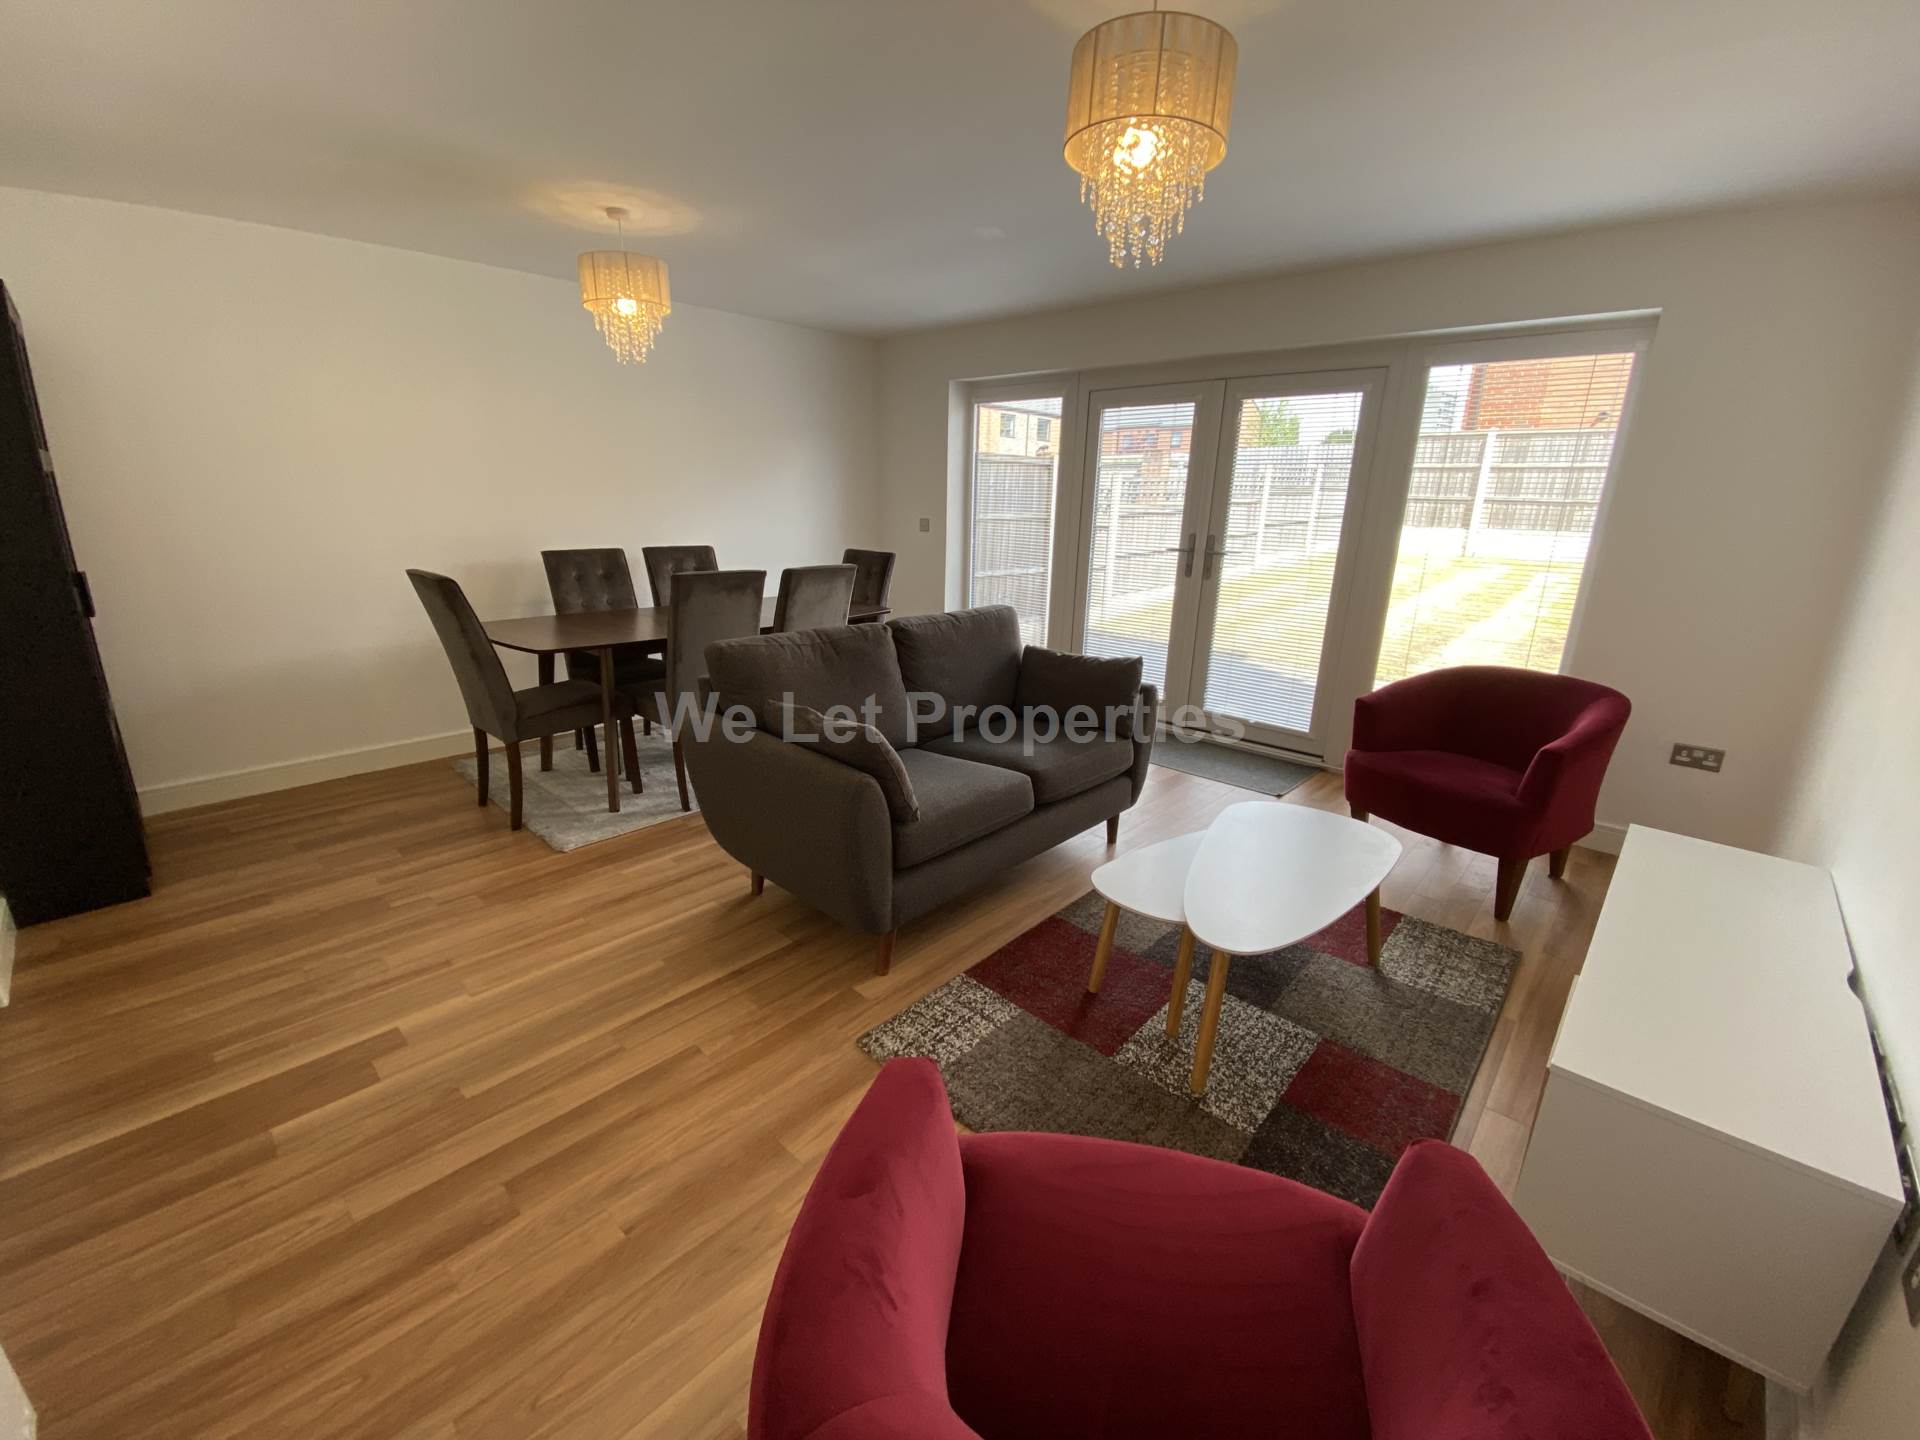 4 bed House (unspecified) for rent in Manchester. From We Let Properties - Manchester